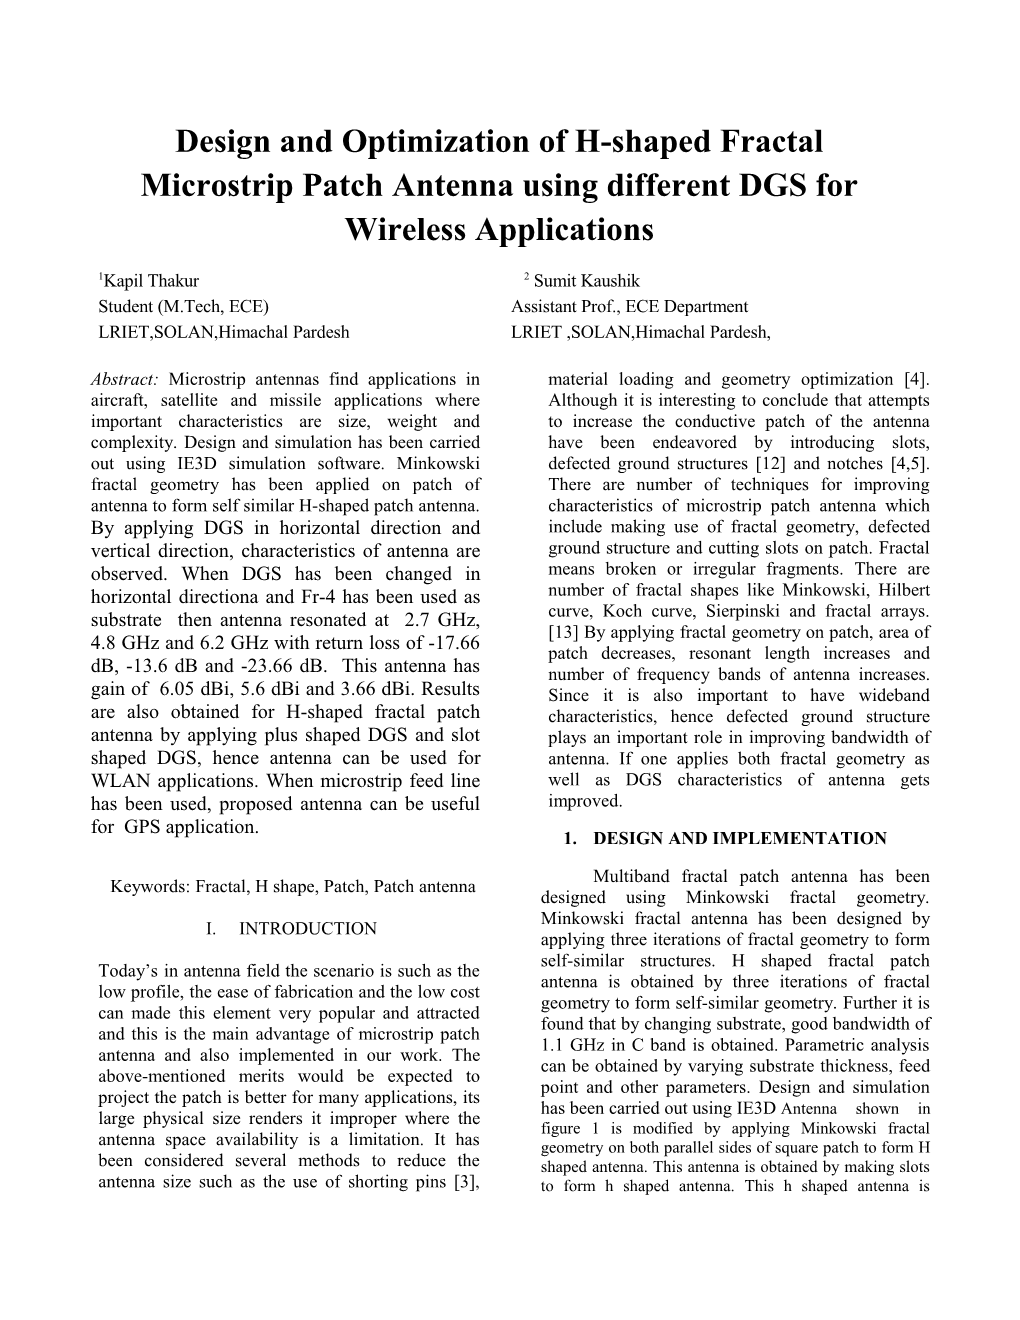 Design and Optimization of H-Shaped Fractal Microstrip Patch Antenna Using Different Dgsfor